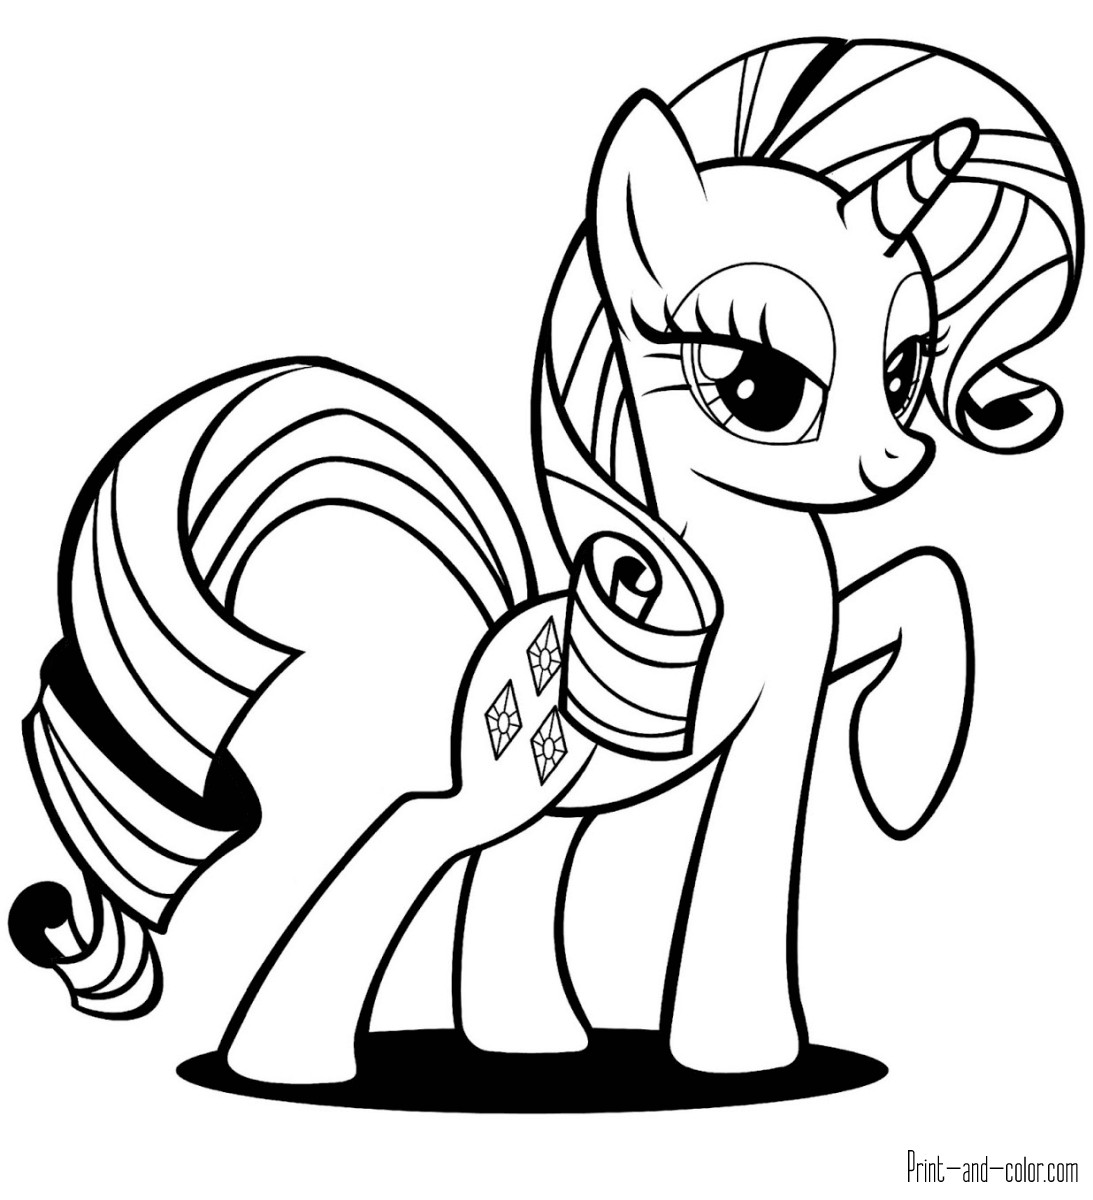 Printable My Little Pony Coloring Pages
 My Little Pony coloring pages